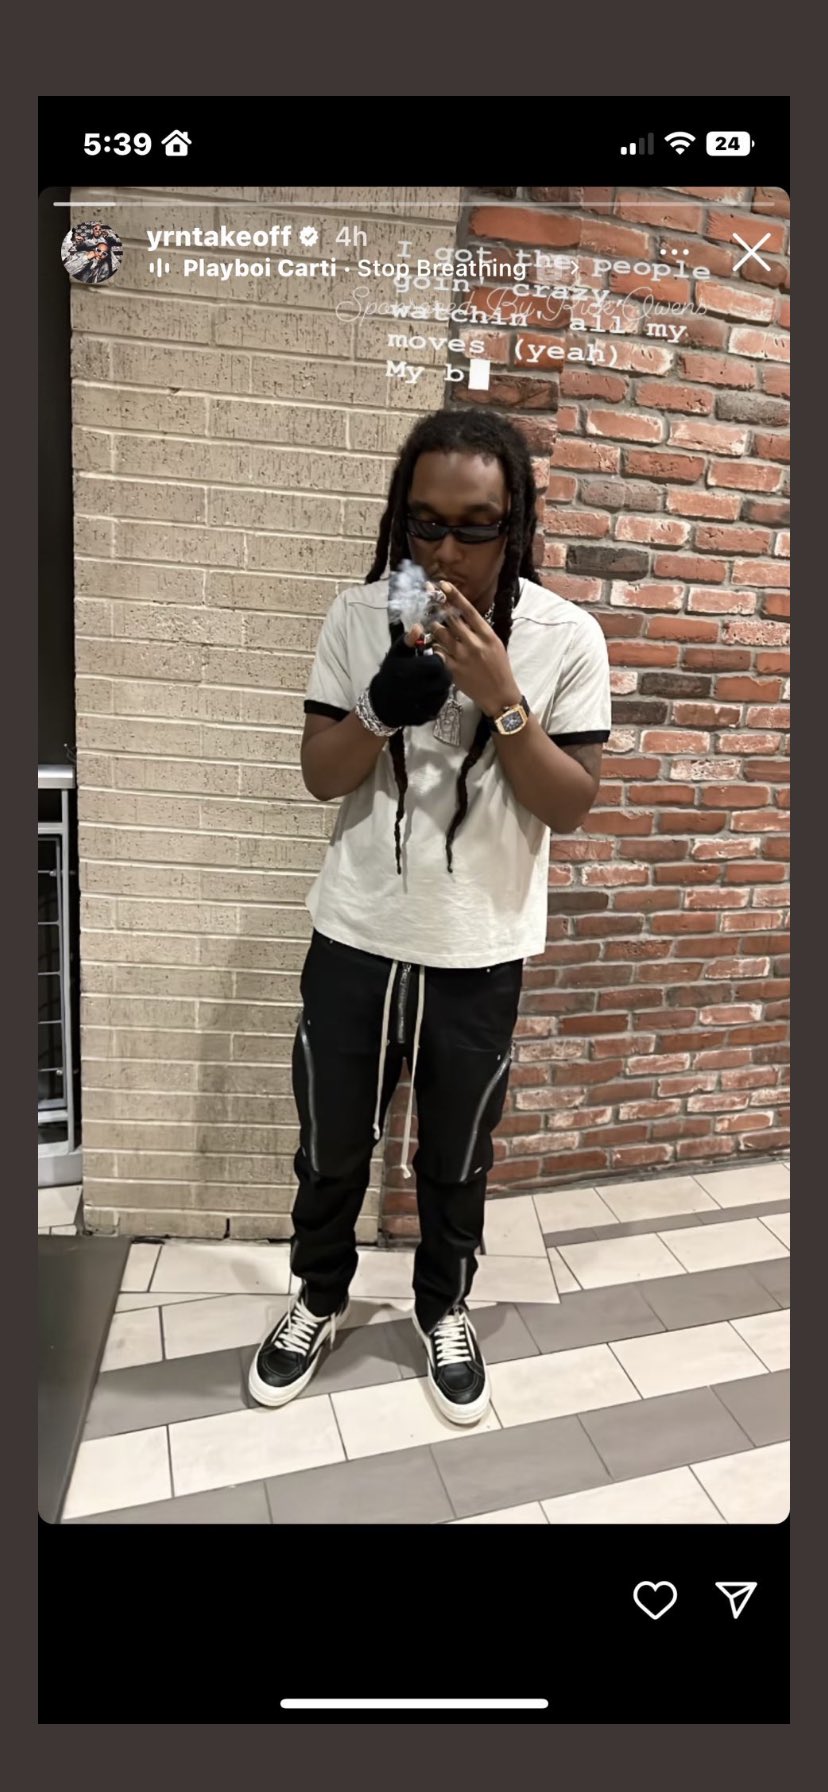 What Happened To Migos Rapper Takeoff? Dead, Alive Or Just Rumor